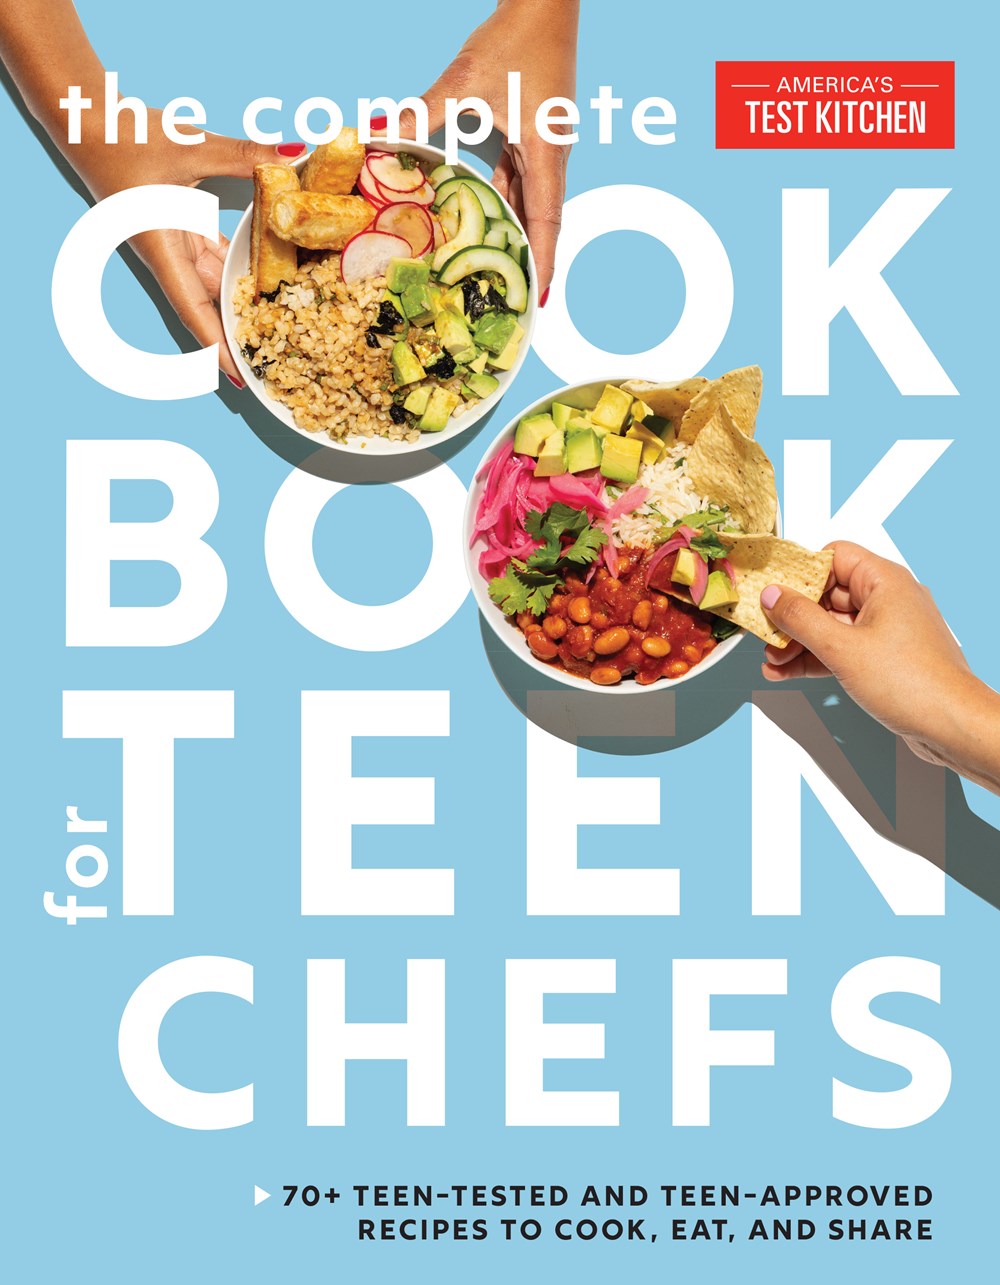 The Complete Cookbook for Teen Chefs: 70+ Teen-Tested and Teen-Approved Recipes to Cook, Eat and Share